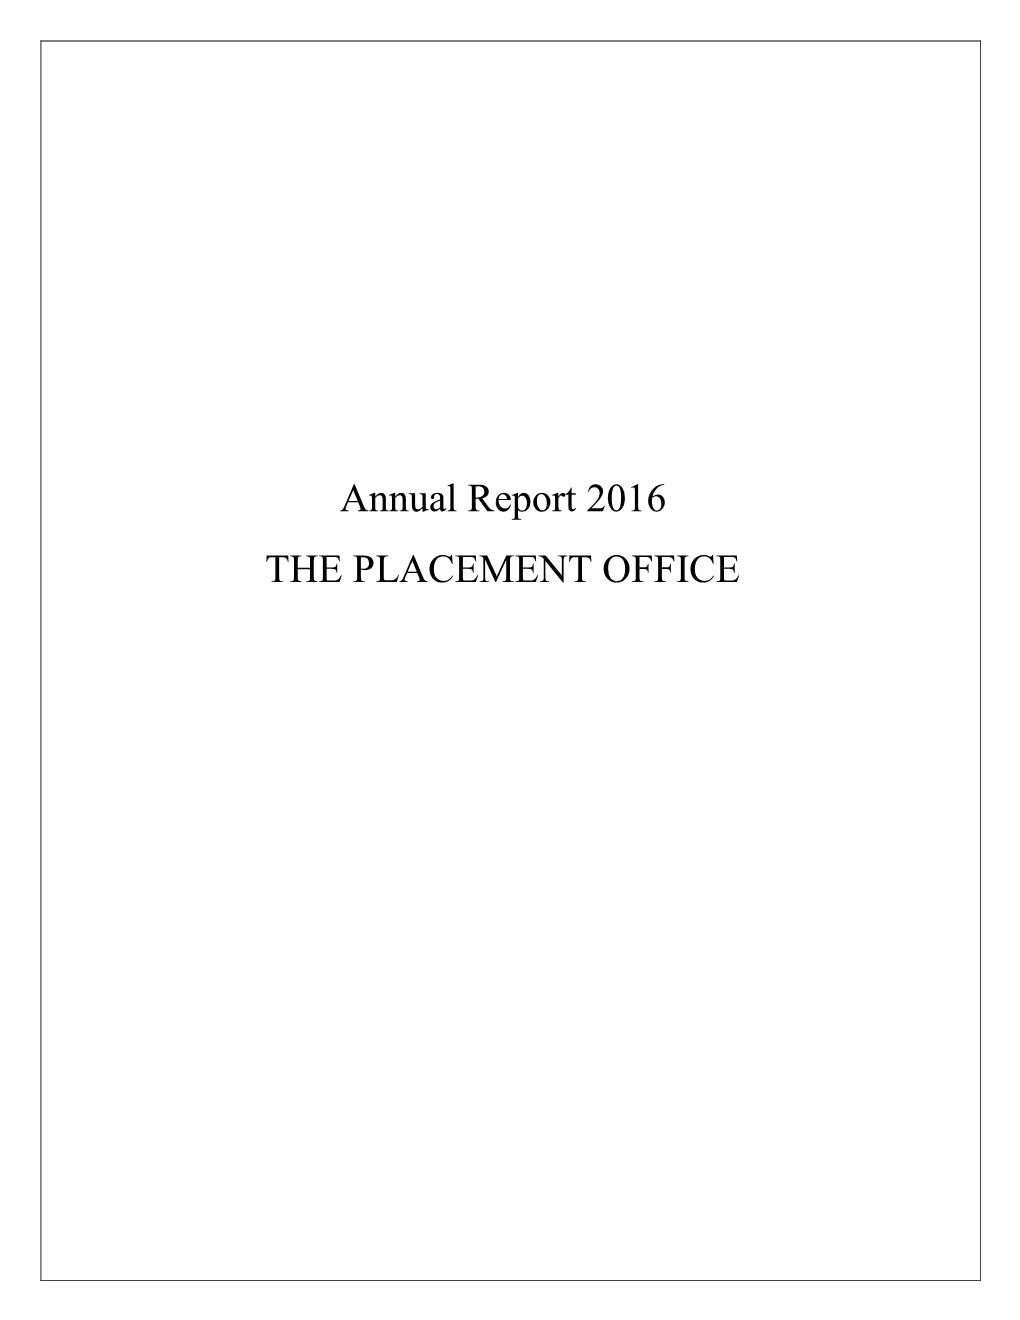 Annual Report 2016 the PLACEMENT OFFICE